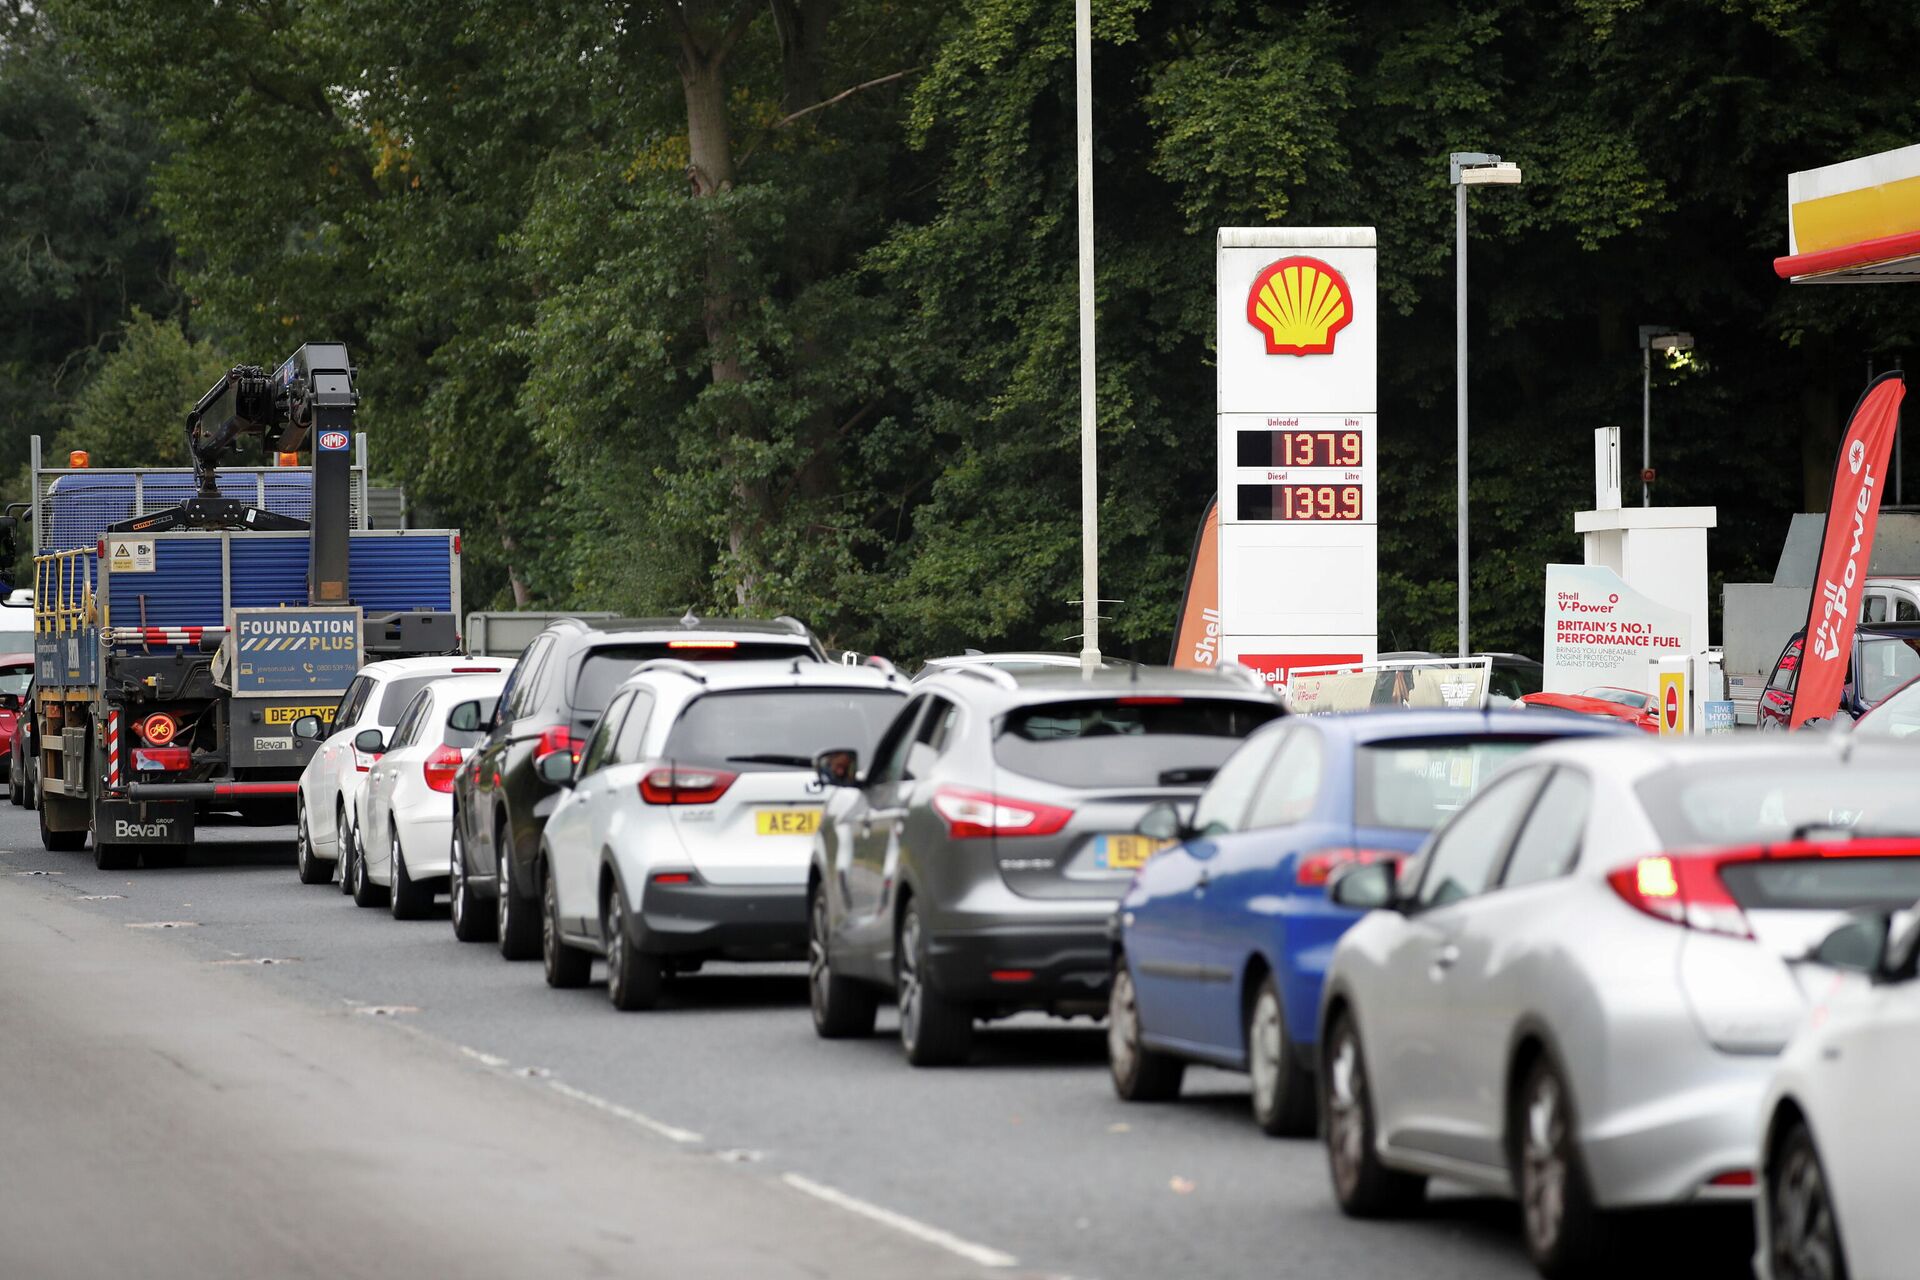 Vehicles queue to refill outside a Shell fuel station in Redbourn, Britain, September 25, 2021. REUTERS/Peter Cziborra - Sputnik International, 1920, 29.09.2021